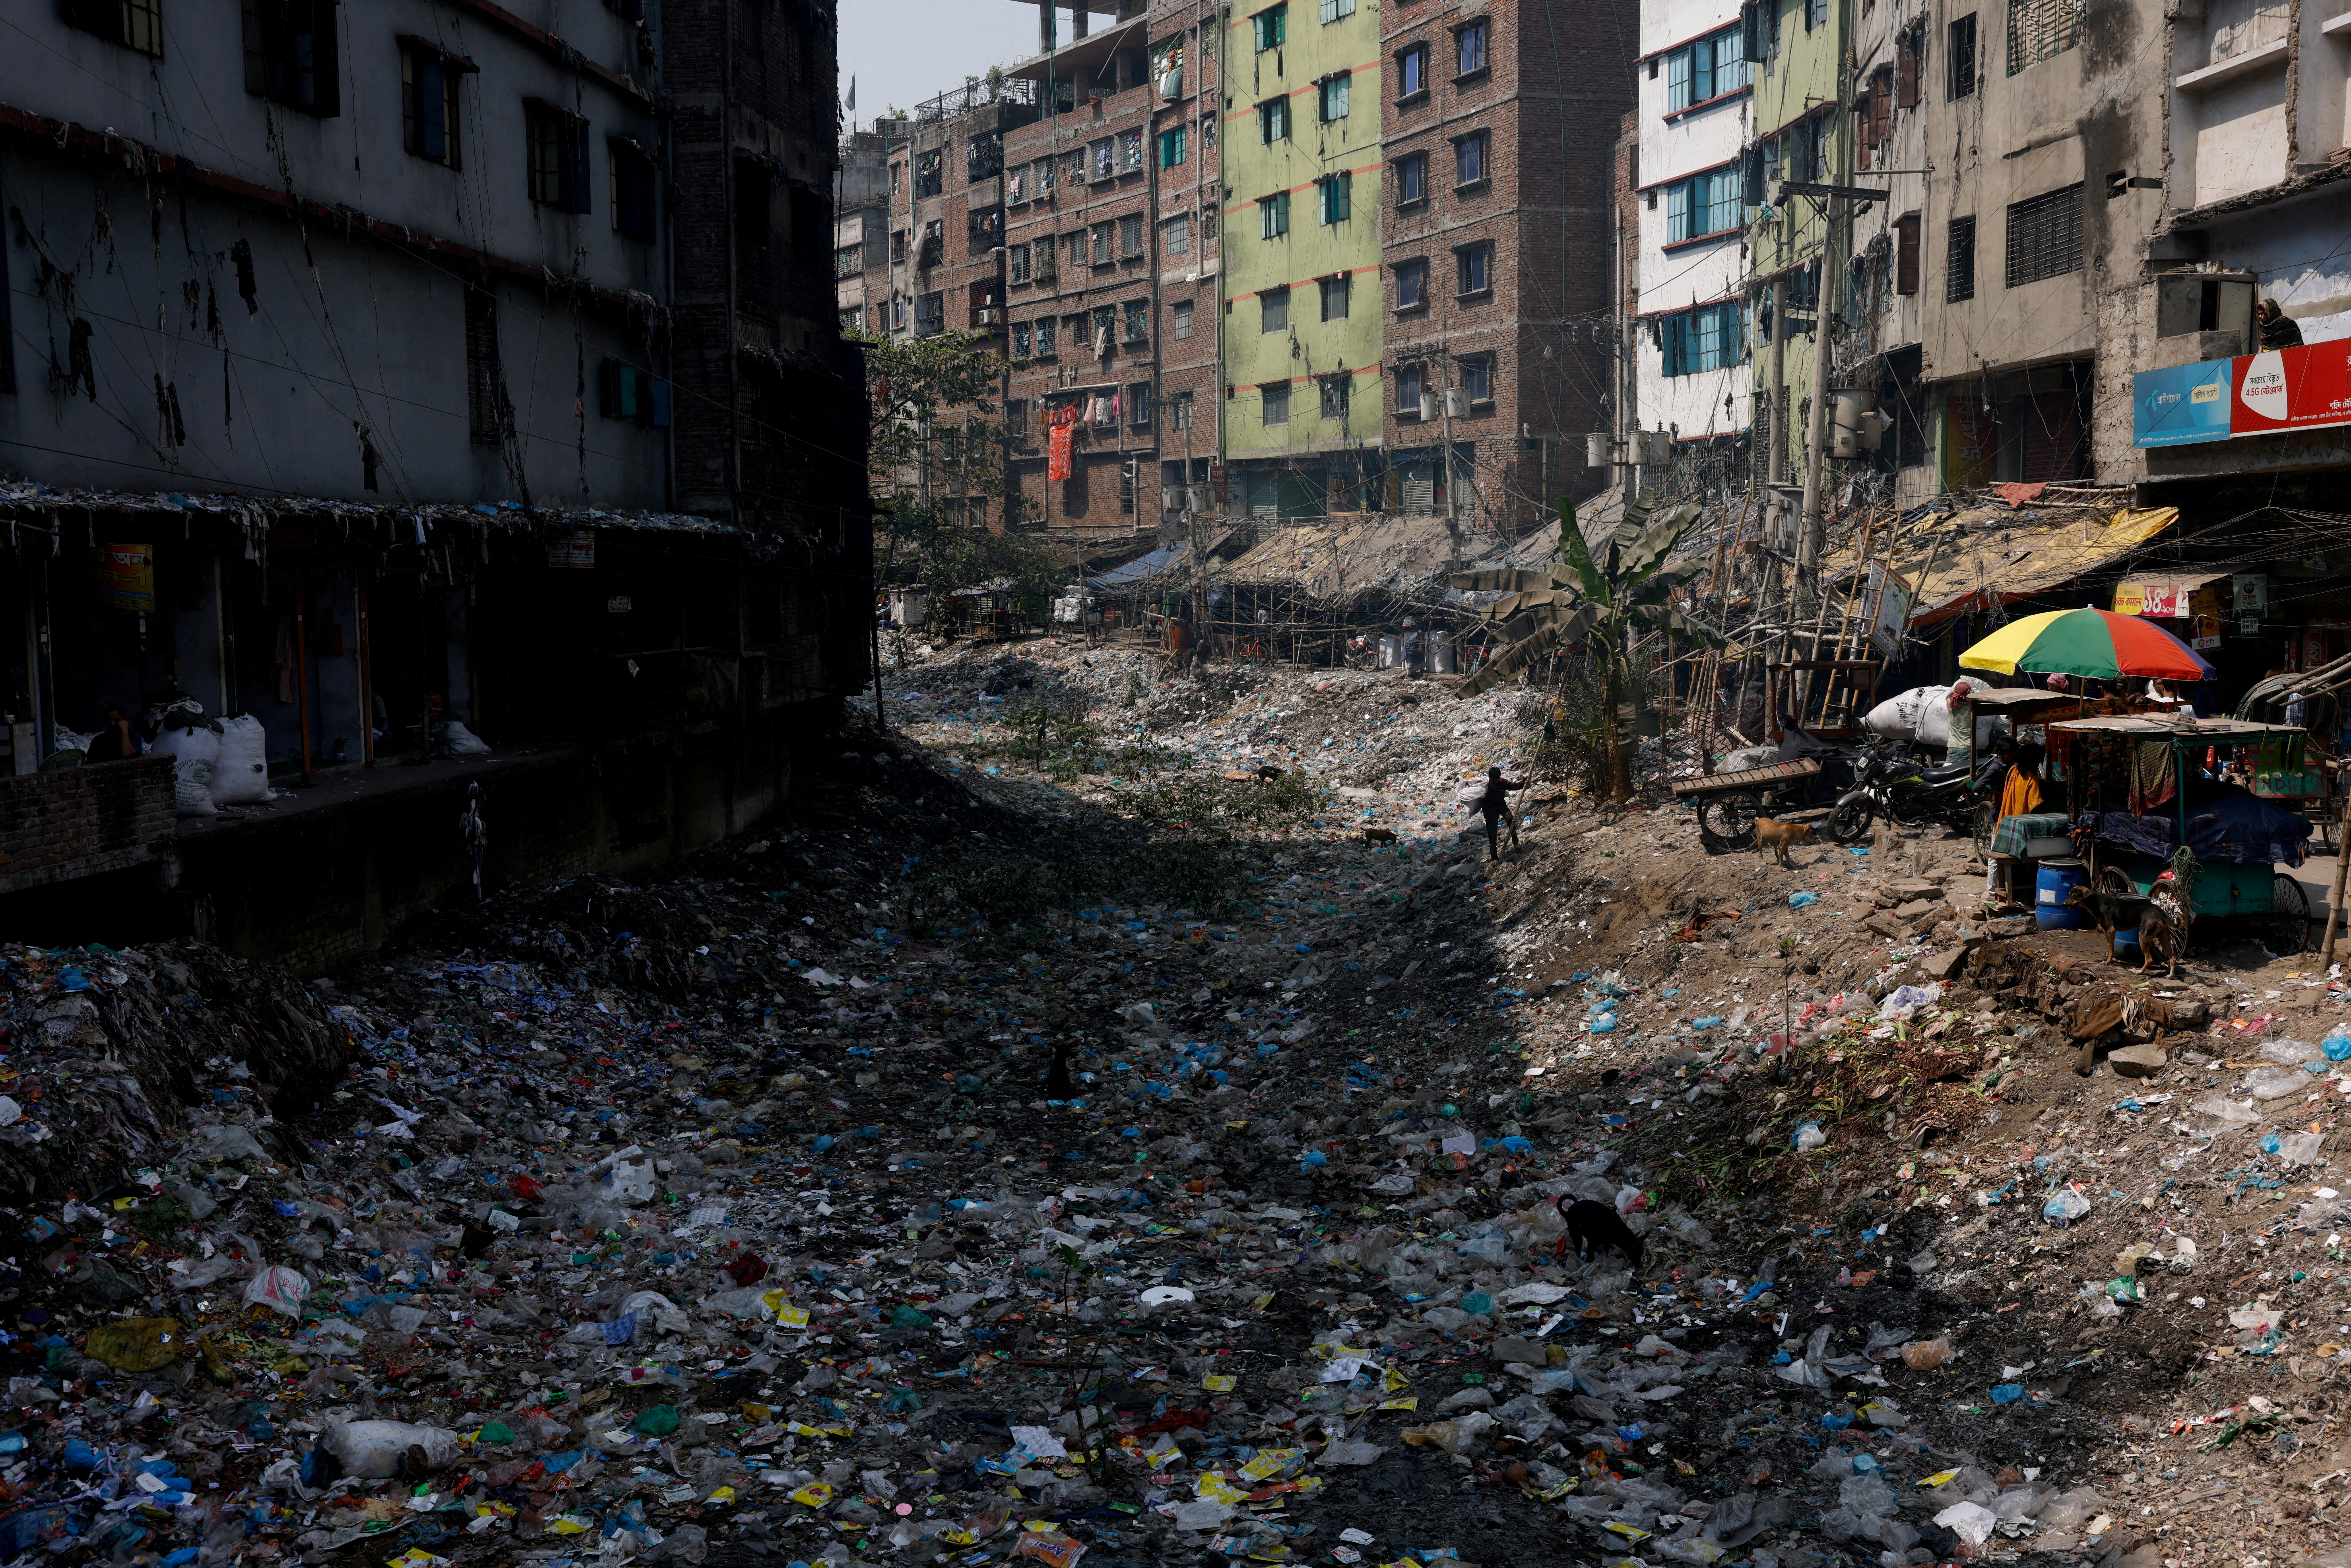 Plastics and other waste in Bangladesh